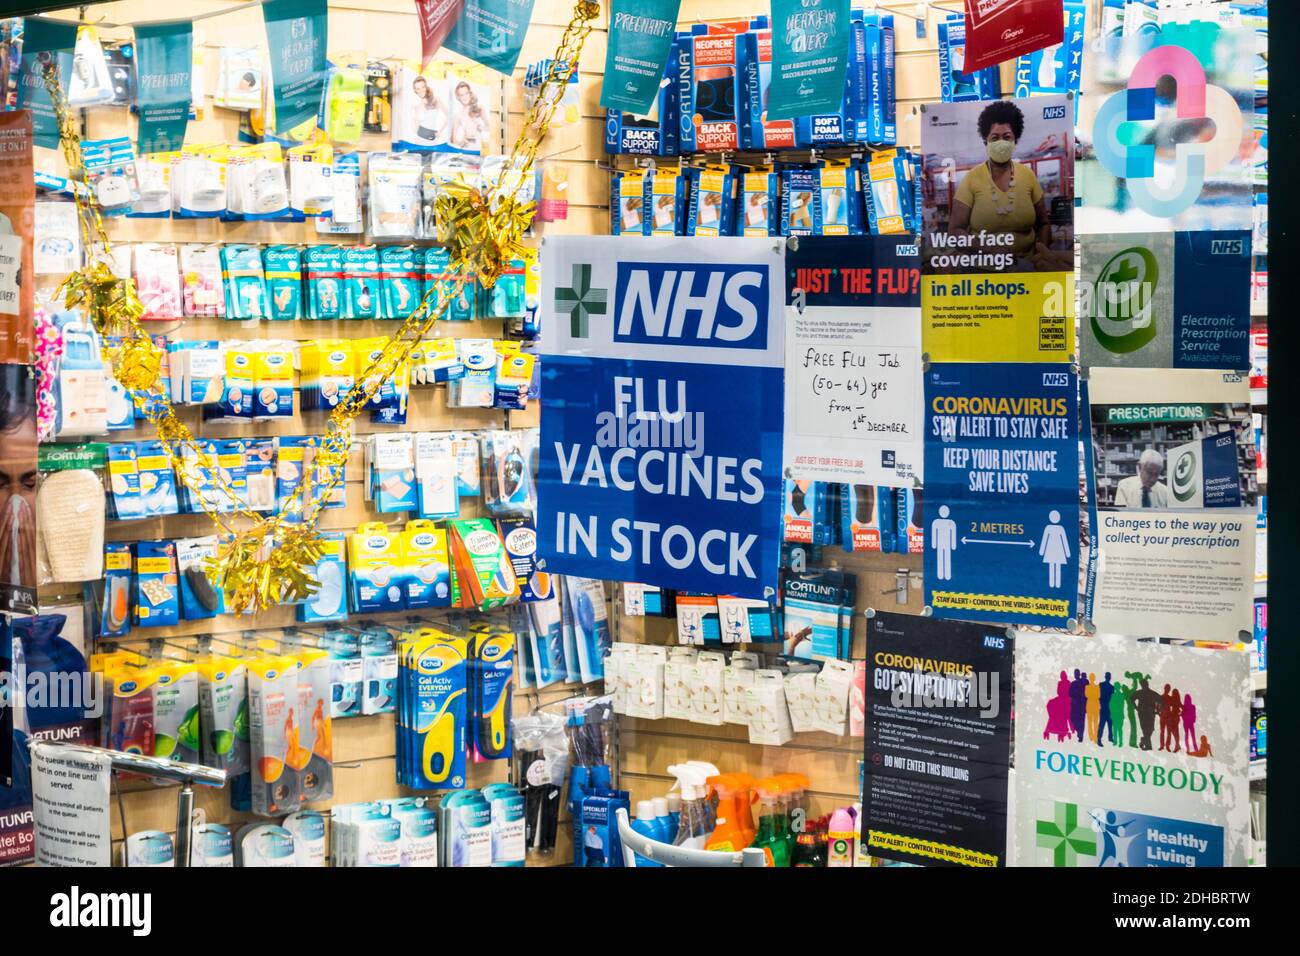 NHS Flu jab / vaccines in stock notice board on the door of an independent pharmacy shop in Barbican, London Stock Photo